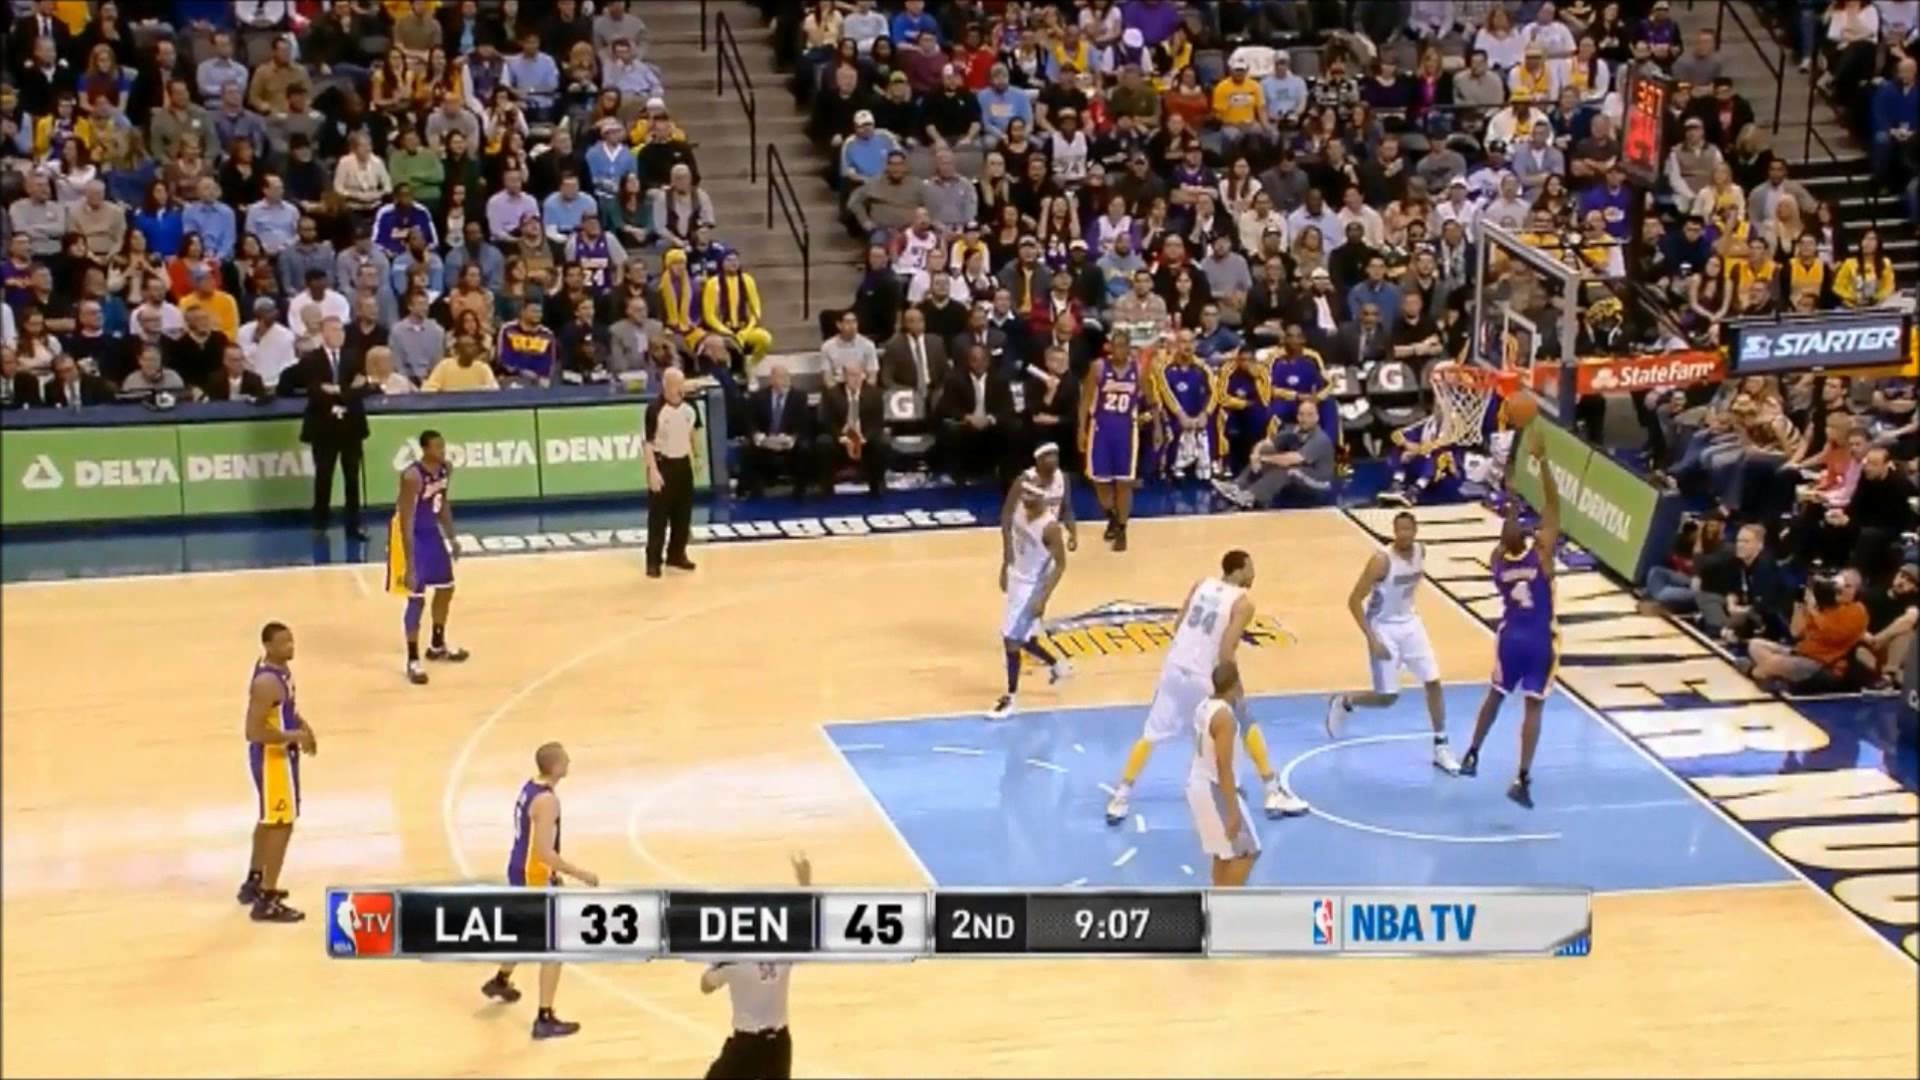 1920x1080 JaVale McGee's improving defense - Lakers at Nuggets 2013 02 25